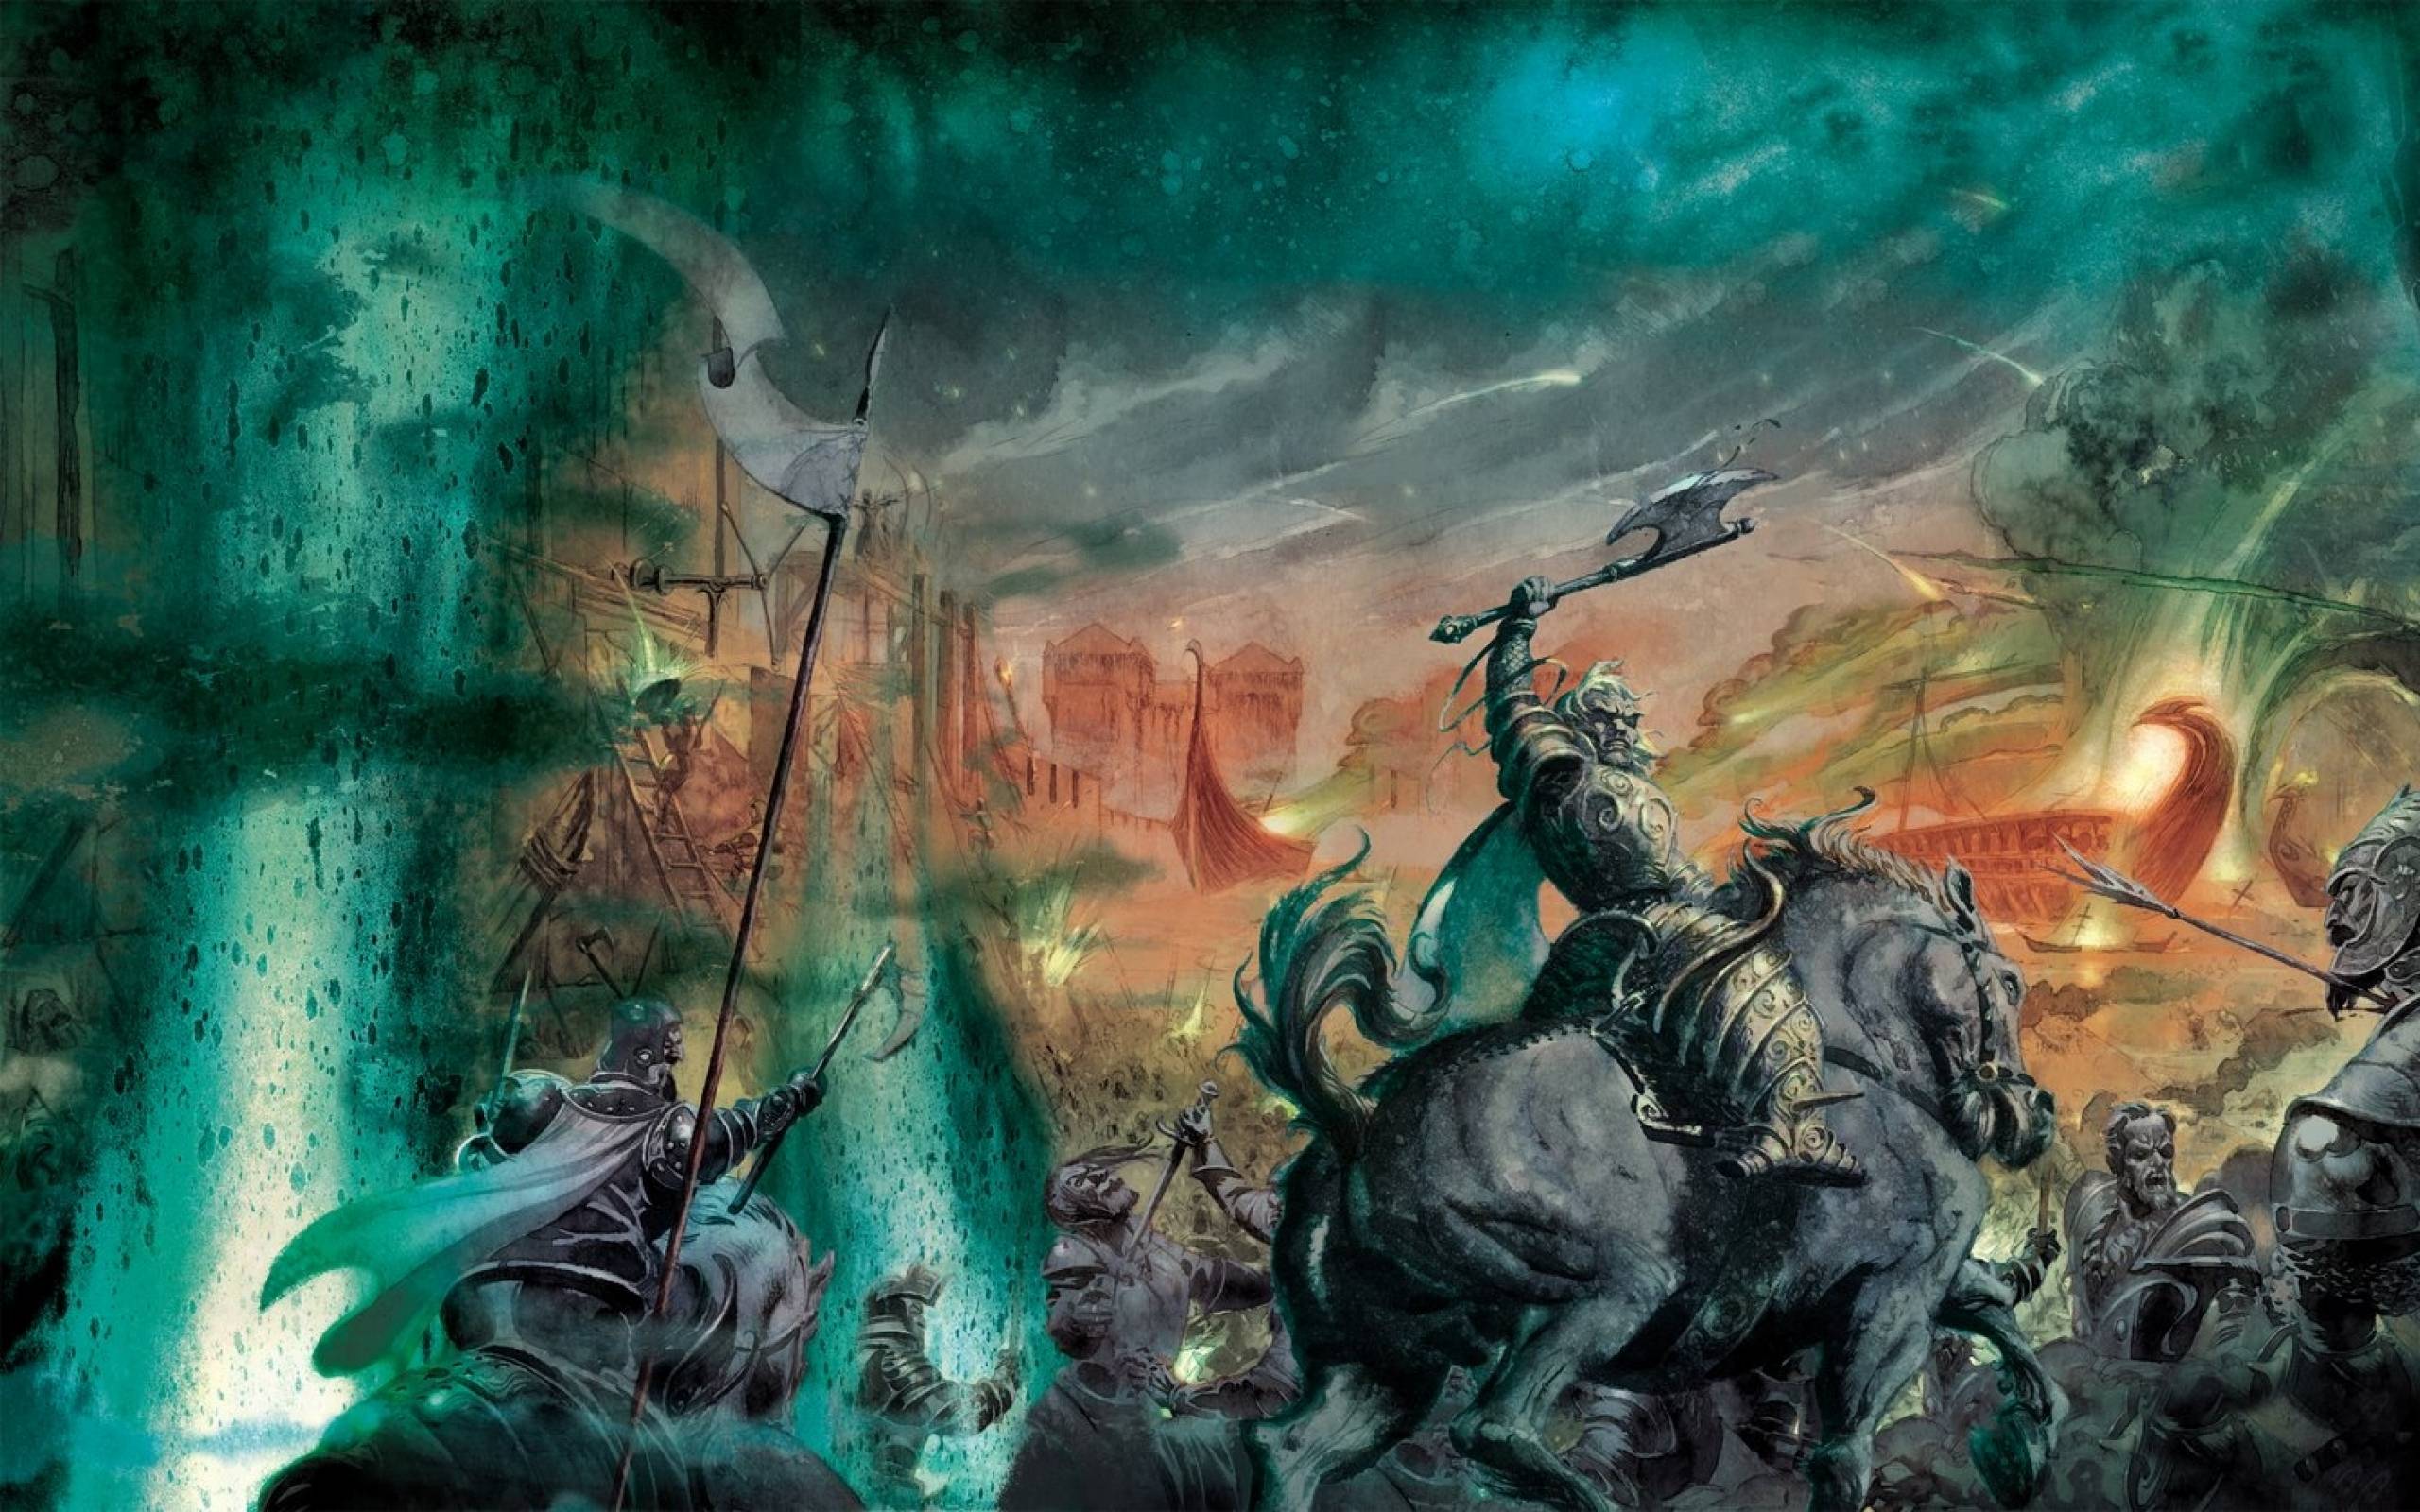 Gallery For Gt Song Of Ice And Fire Wallpaper